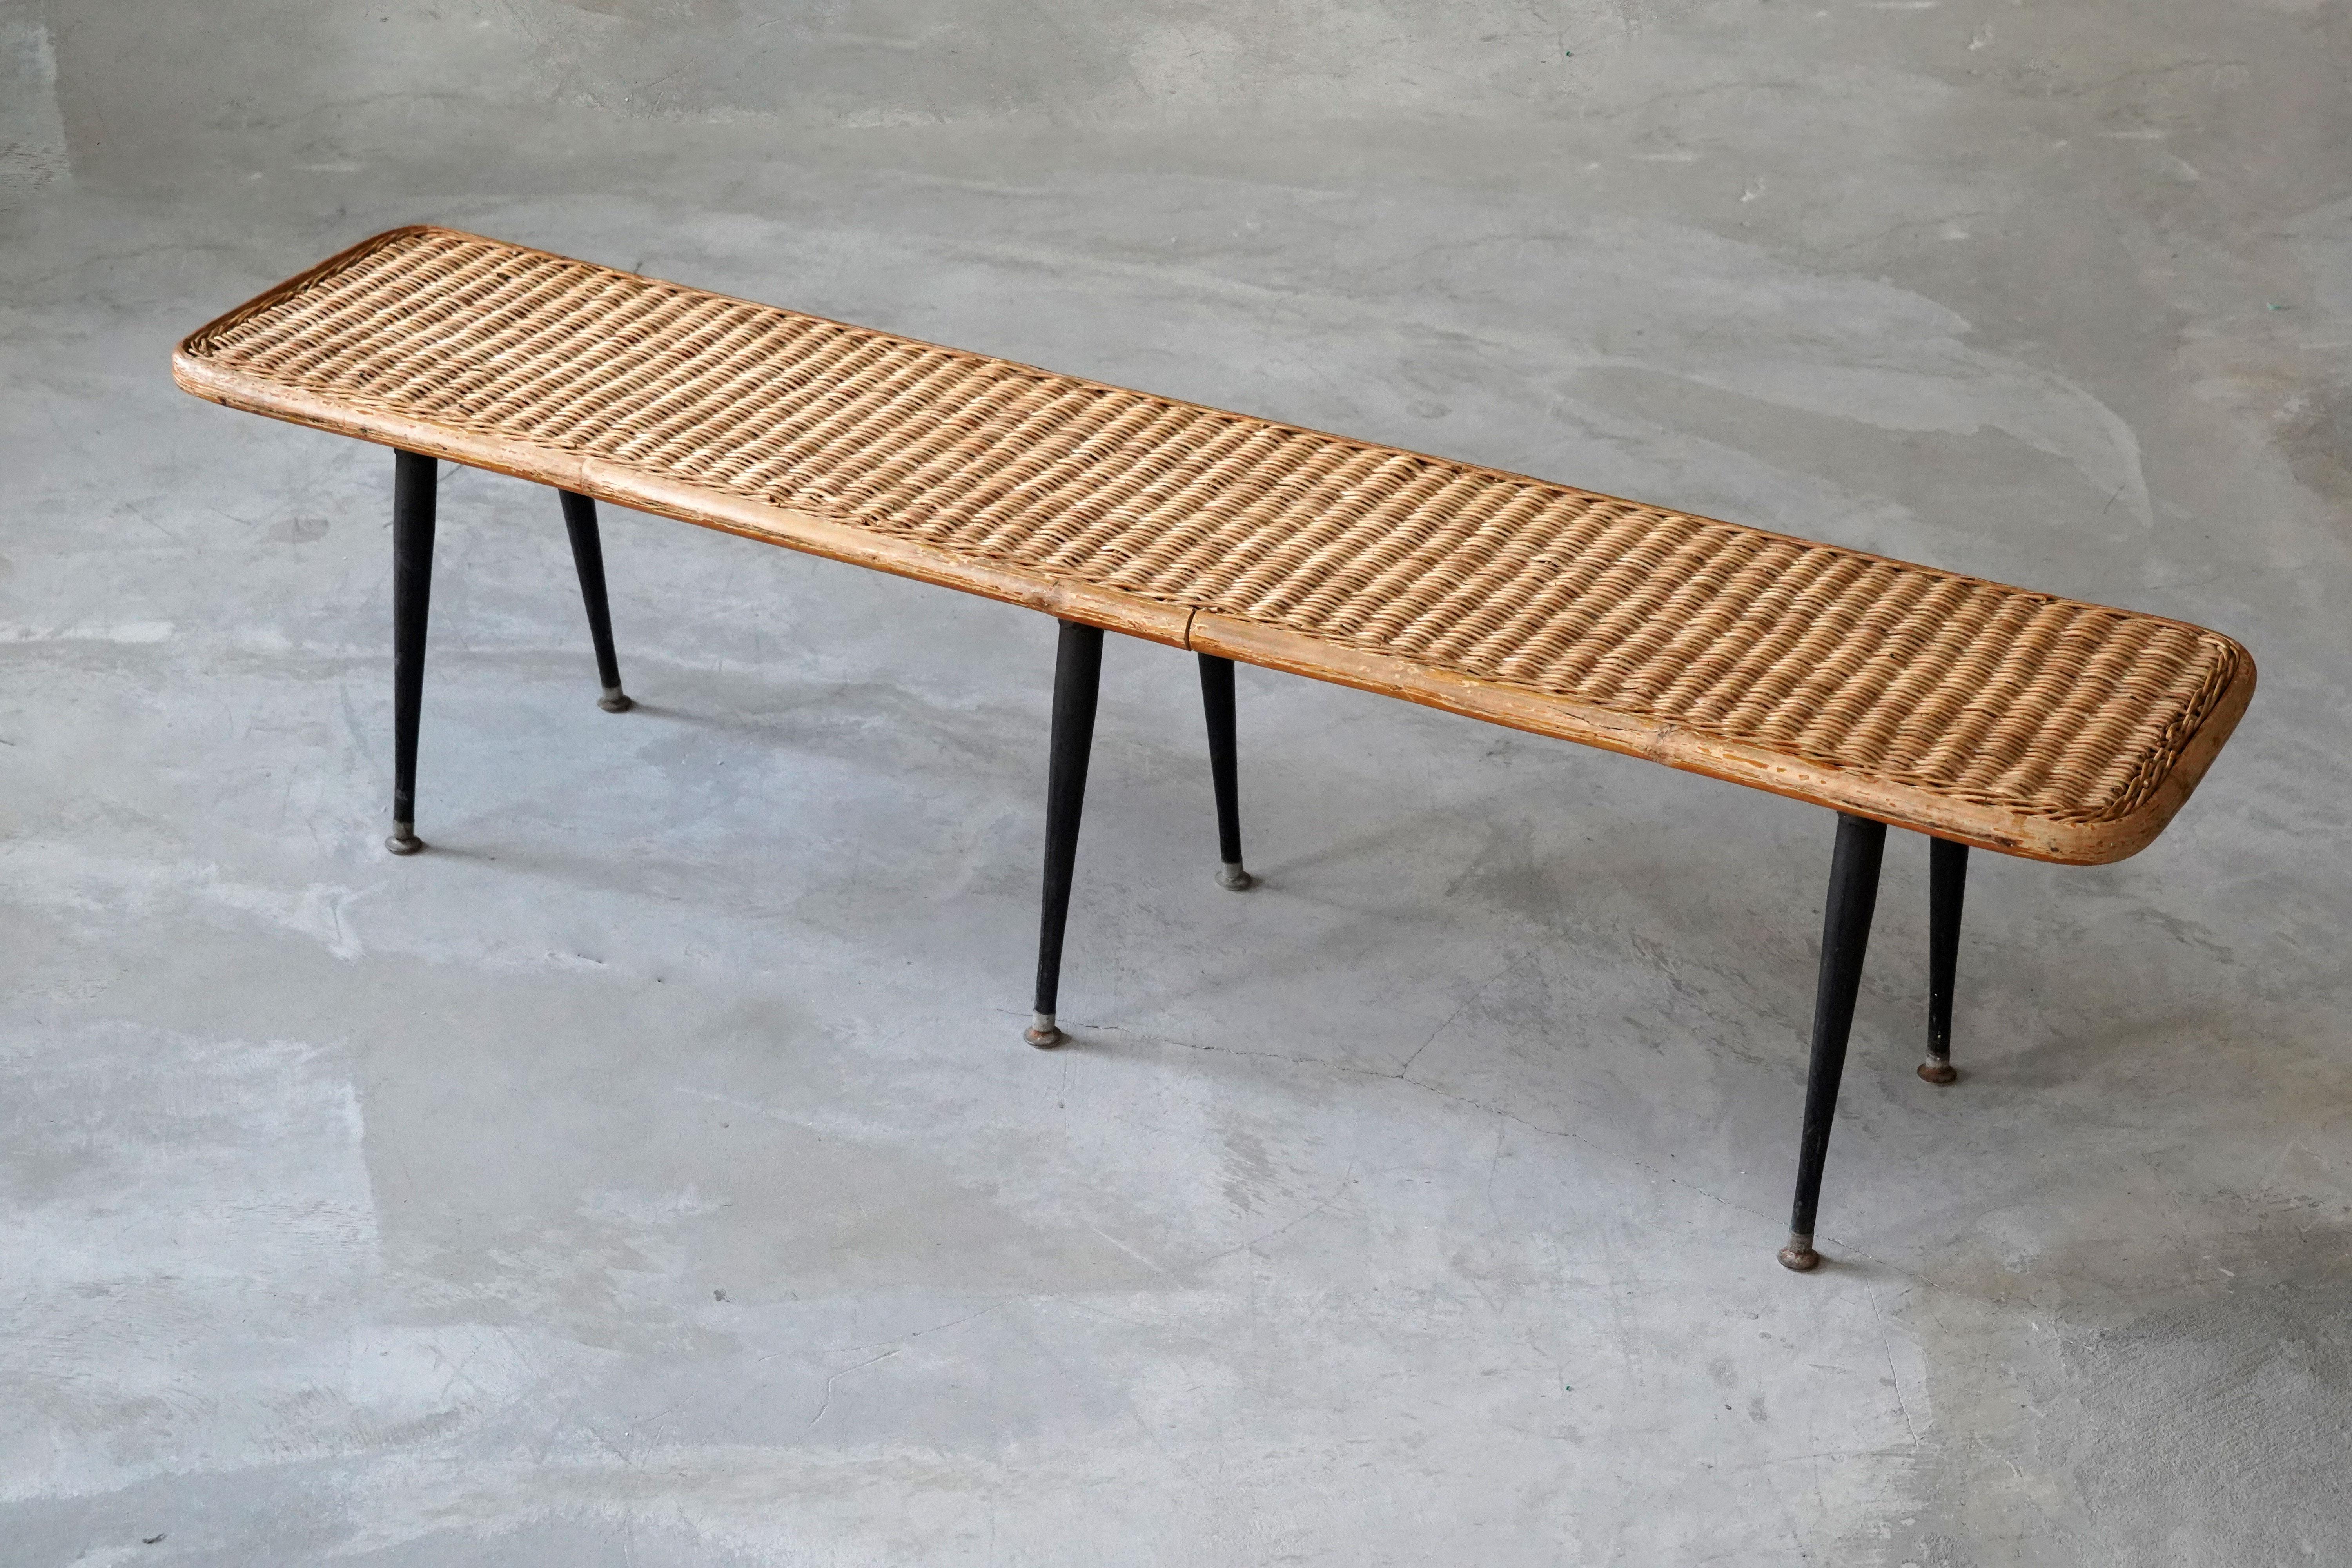 A bench. Designed and produced in America, 1950s. Woven rattan, bamboo, and lacquered steel.

Other designers of the period include Paul Frankl, Isamu Noguchi, George Nakashima, Edward Wormley, and Charles & Ray Eames.